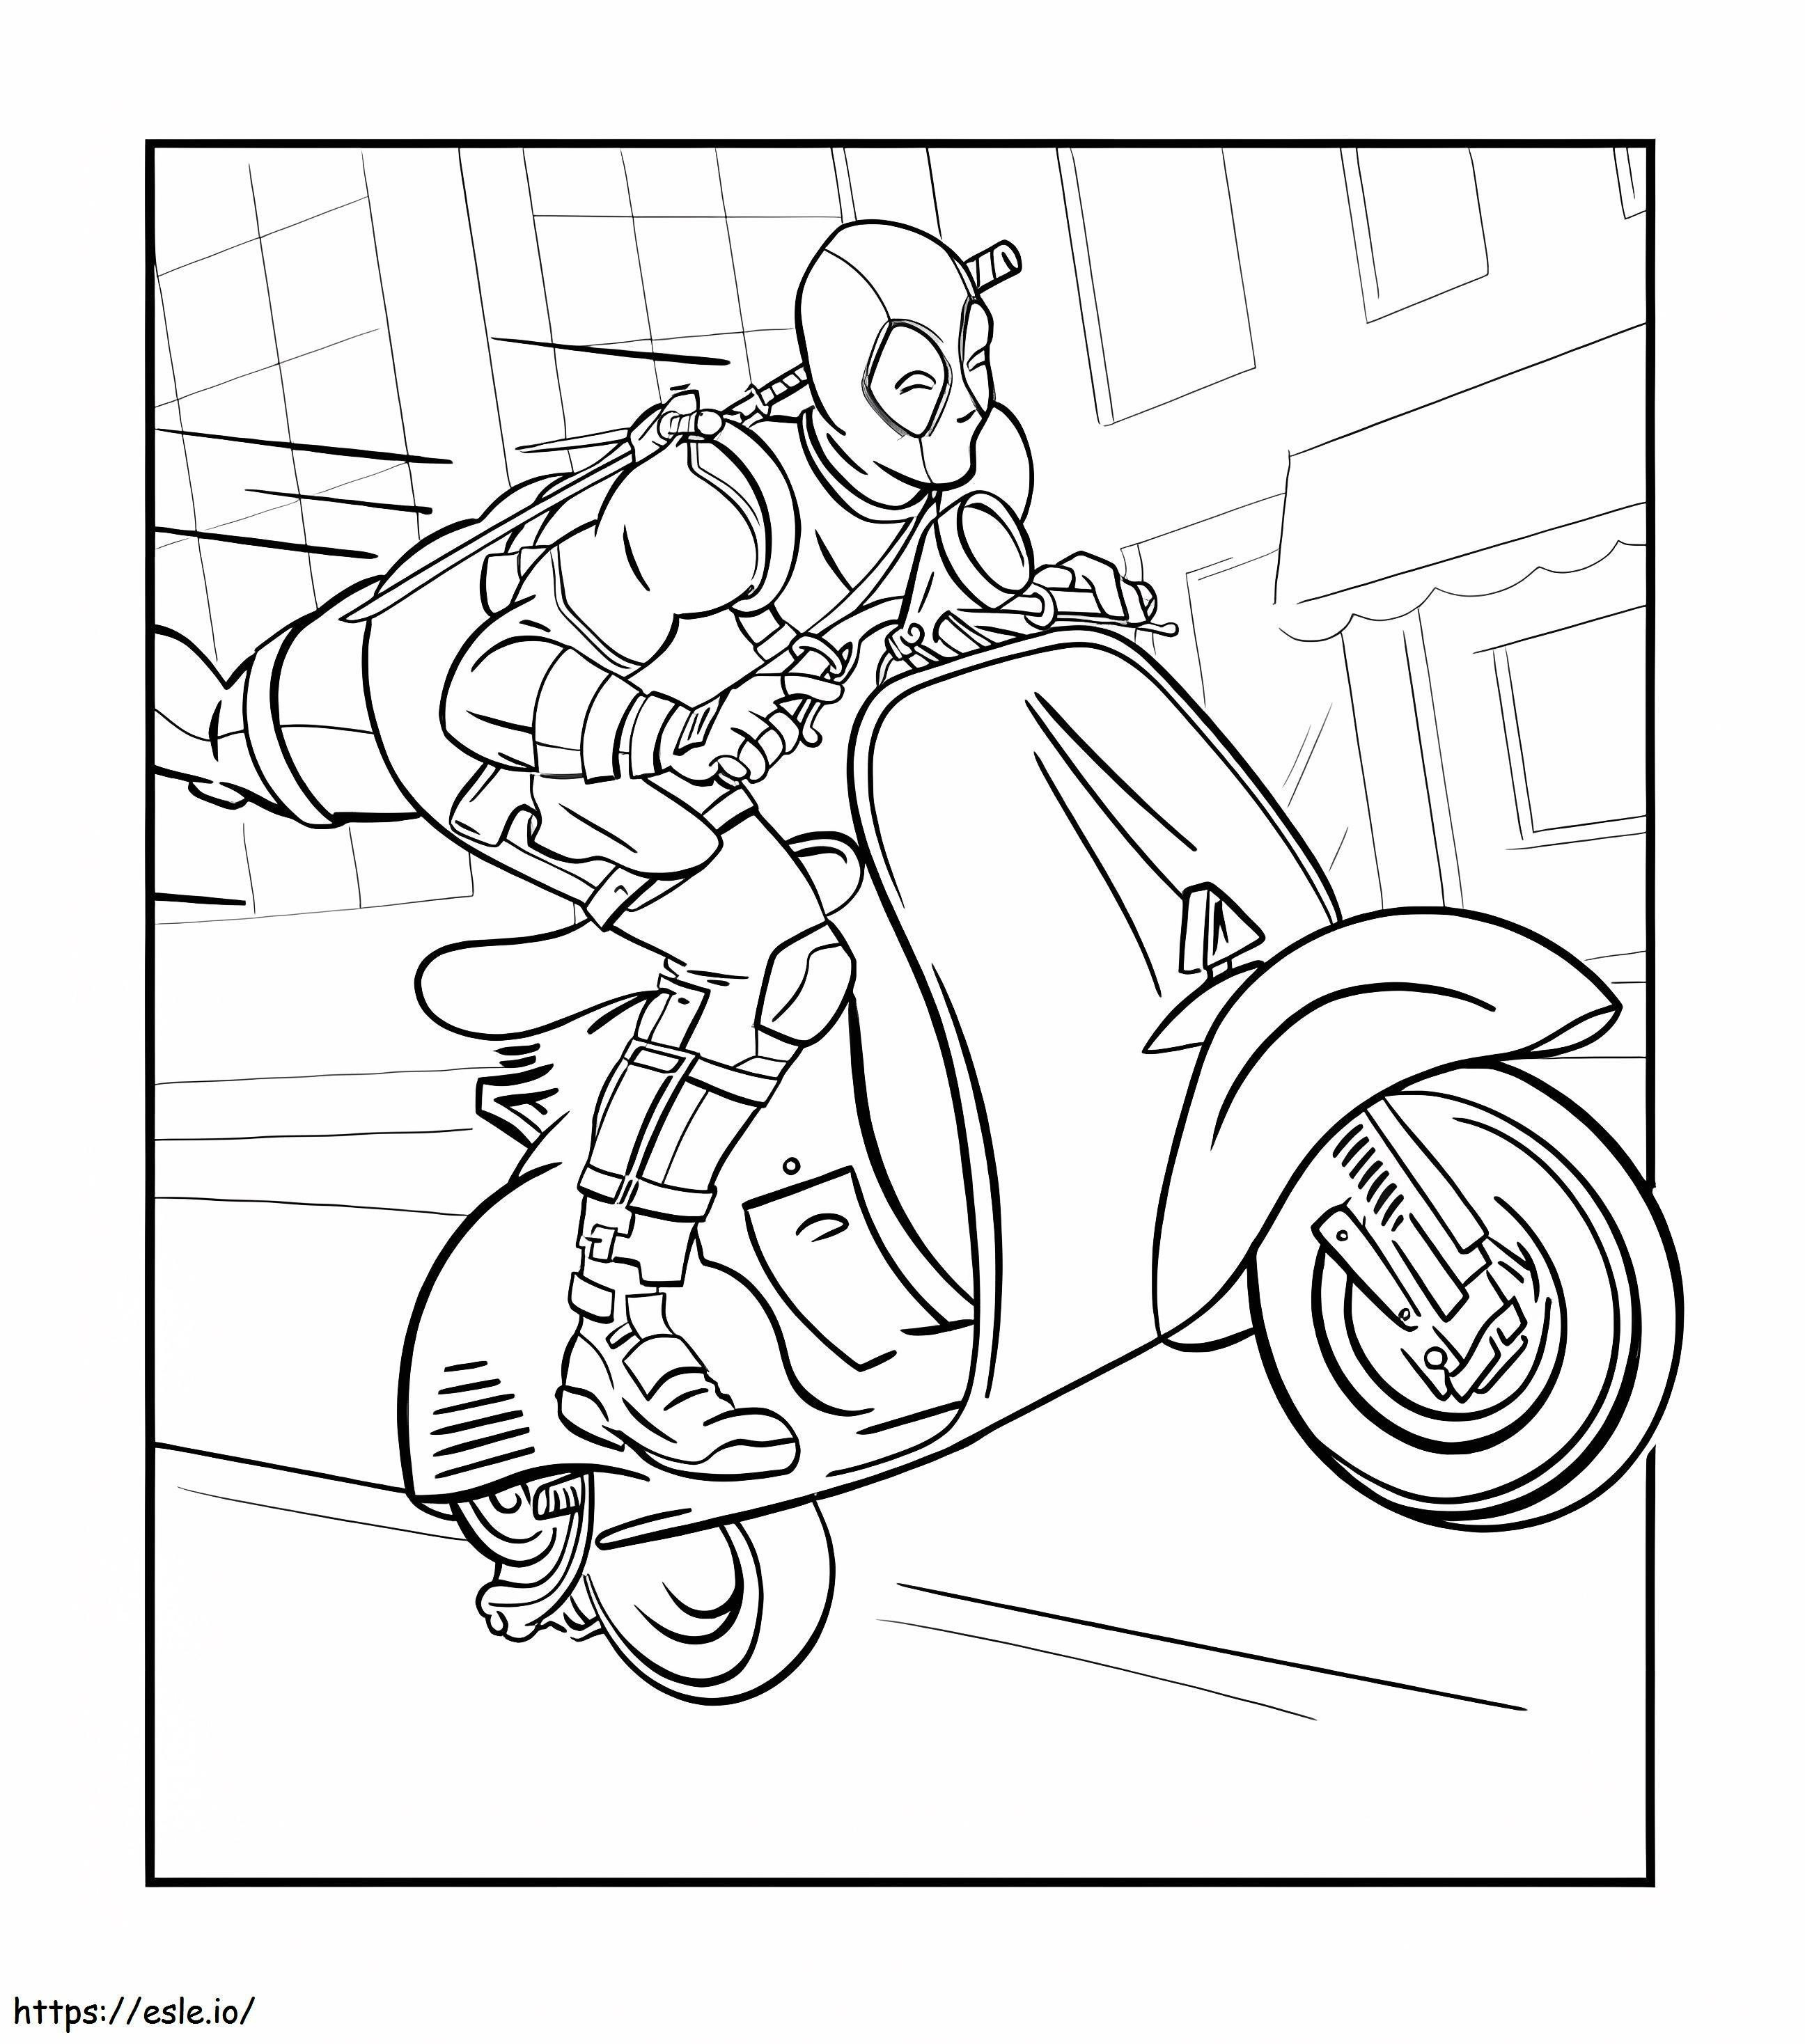 Deadpool Riding A Motorcycle coloring page